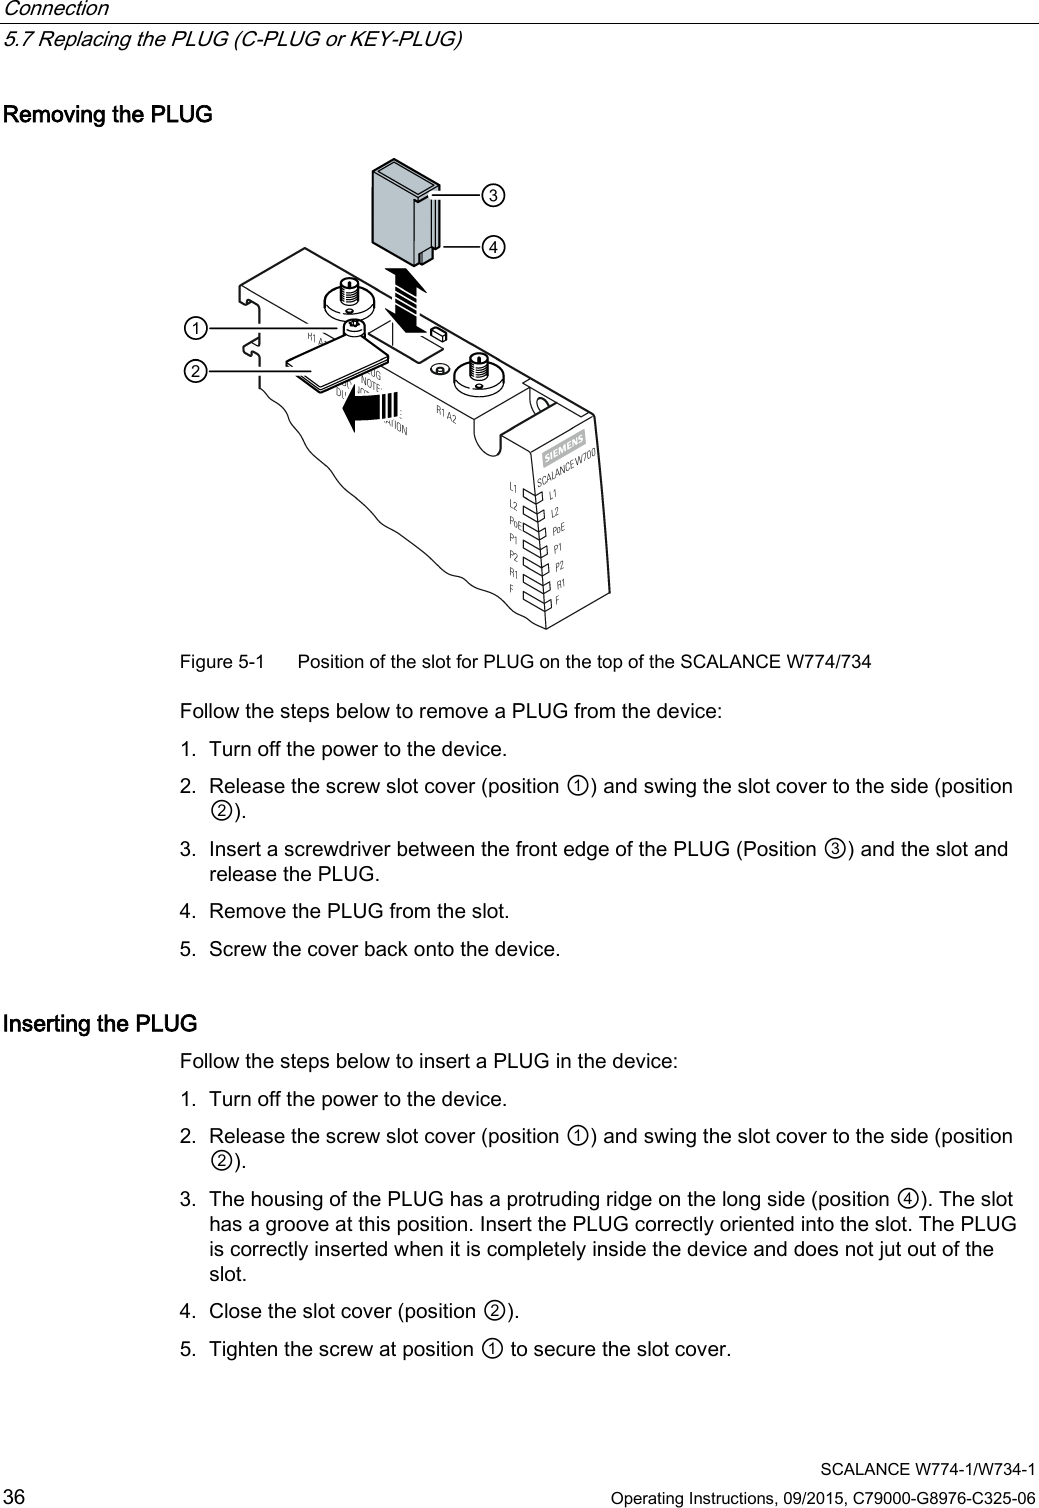 Connection   5.7 Replacing the PLUG (C-PLUG or KEY-PLUG)  SCALANCE W774-1/W734-1 36 Operating Instructions, 09/2015, C79000-G8976-C325-06 Removing the PLUG  Figure 5-1  Position of the slot for PLUG on the top of the SCALANCE W774/734 Follow the steps below to remove a PLUG from the device: 1. Turn off the power to the device. 2. Release the screw slot cover (position ①) and swing the slot cover to the side (position ②). 3. Insert a screwdriver between the front edge of the PLUG (Position ③) and the slot and release the PLUG. 4. Remove the PLUG from the slot. 5. Screw the cover back onto the device. Inserting the PLUG Follow the steps below to insert a PLUG in the device: 1. Turn off the power to the device. 2. Release the screw slot cover (position ①) and swing the slot cover to the side (position ②). 3. The housing of the PLUG has a protruding ridge on the long side (position ④). The slot has a groove at this position. Insert the PLUG correctly oriented into the slot. The PLUG is correctly inserted when it is completely inside the device and does not jut out of the slot. 4. Close the slot cover (position ②). 5. Tighten the screw at position ① to secure the slot cover. 